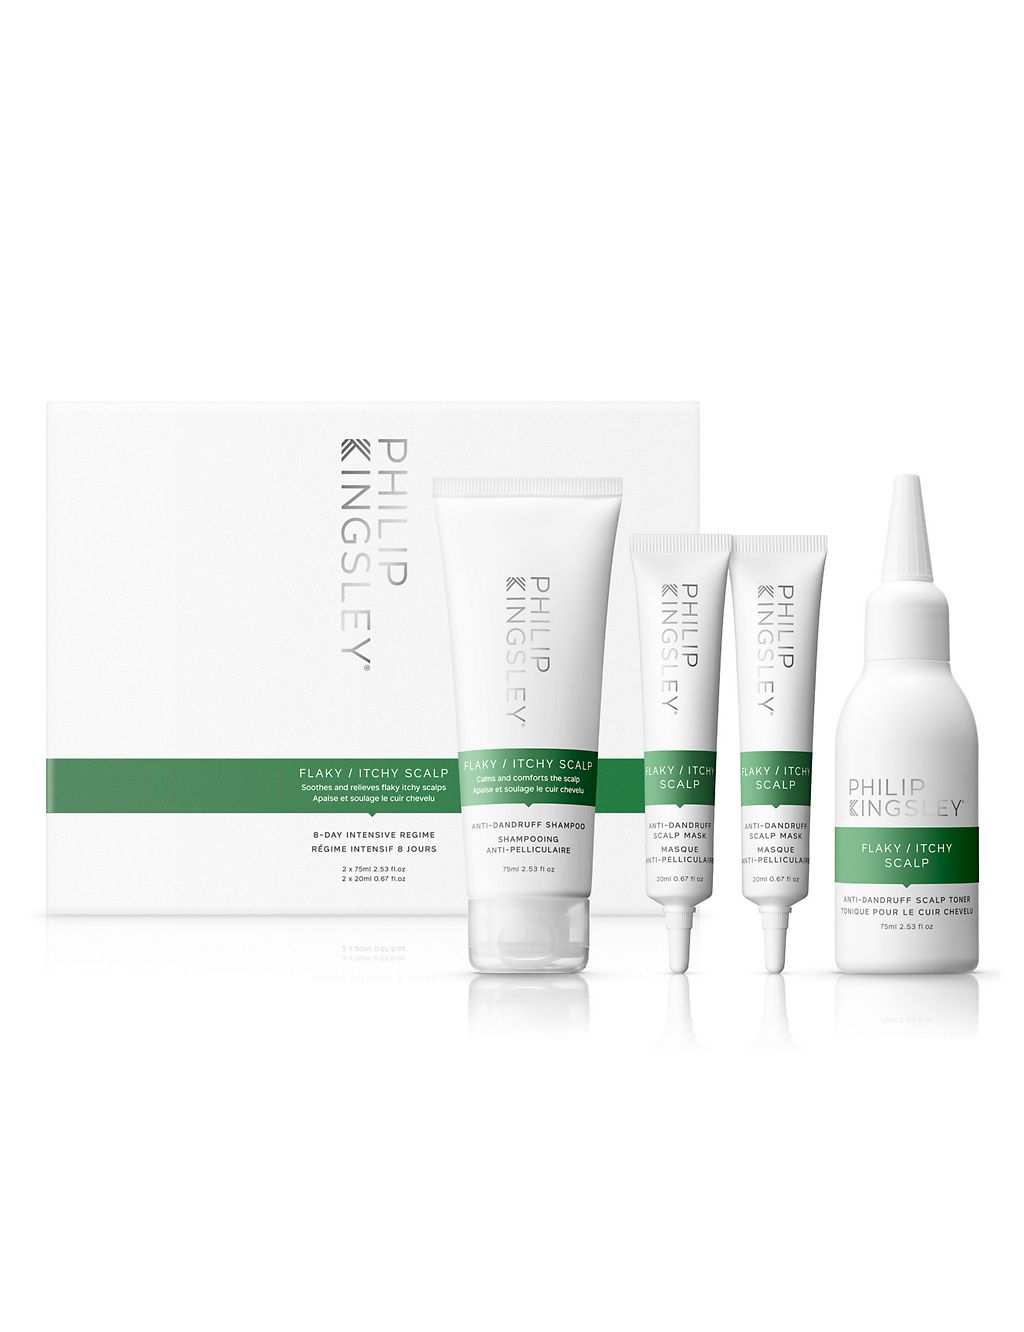 Flaky/Itchy Scalp Regime Kit 3 of 5